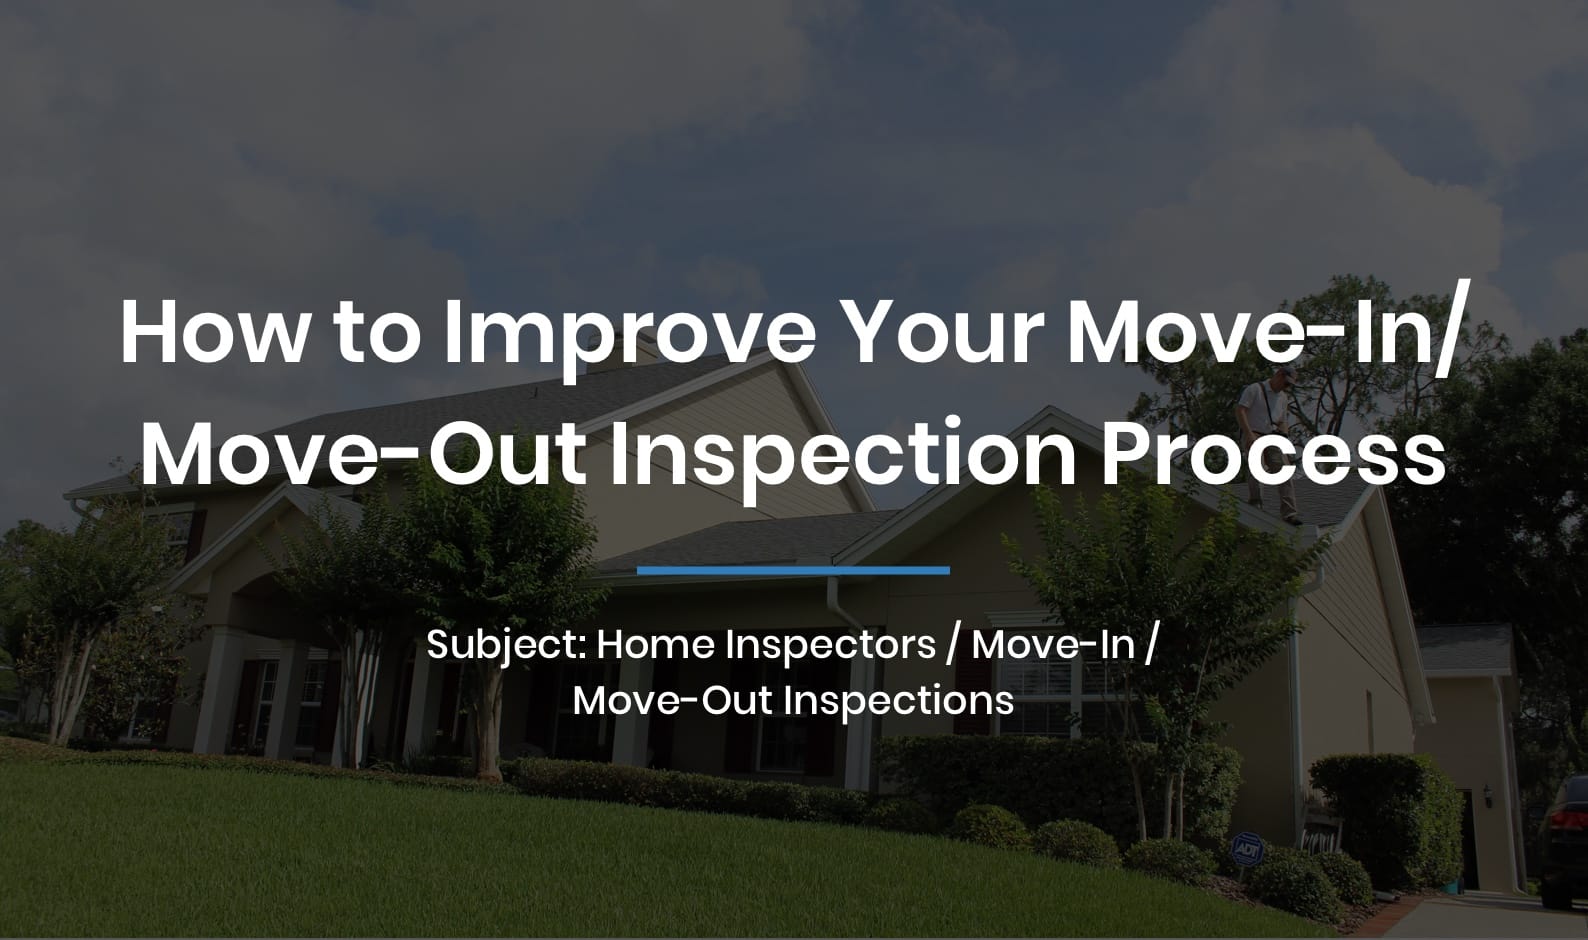 How to improve your move-in/move-out inspection process